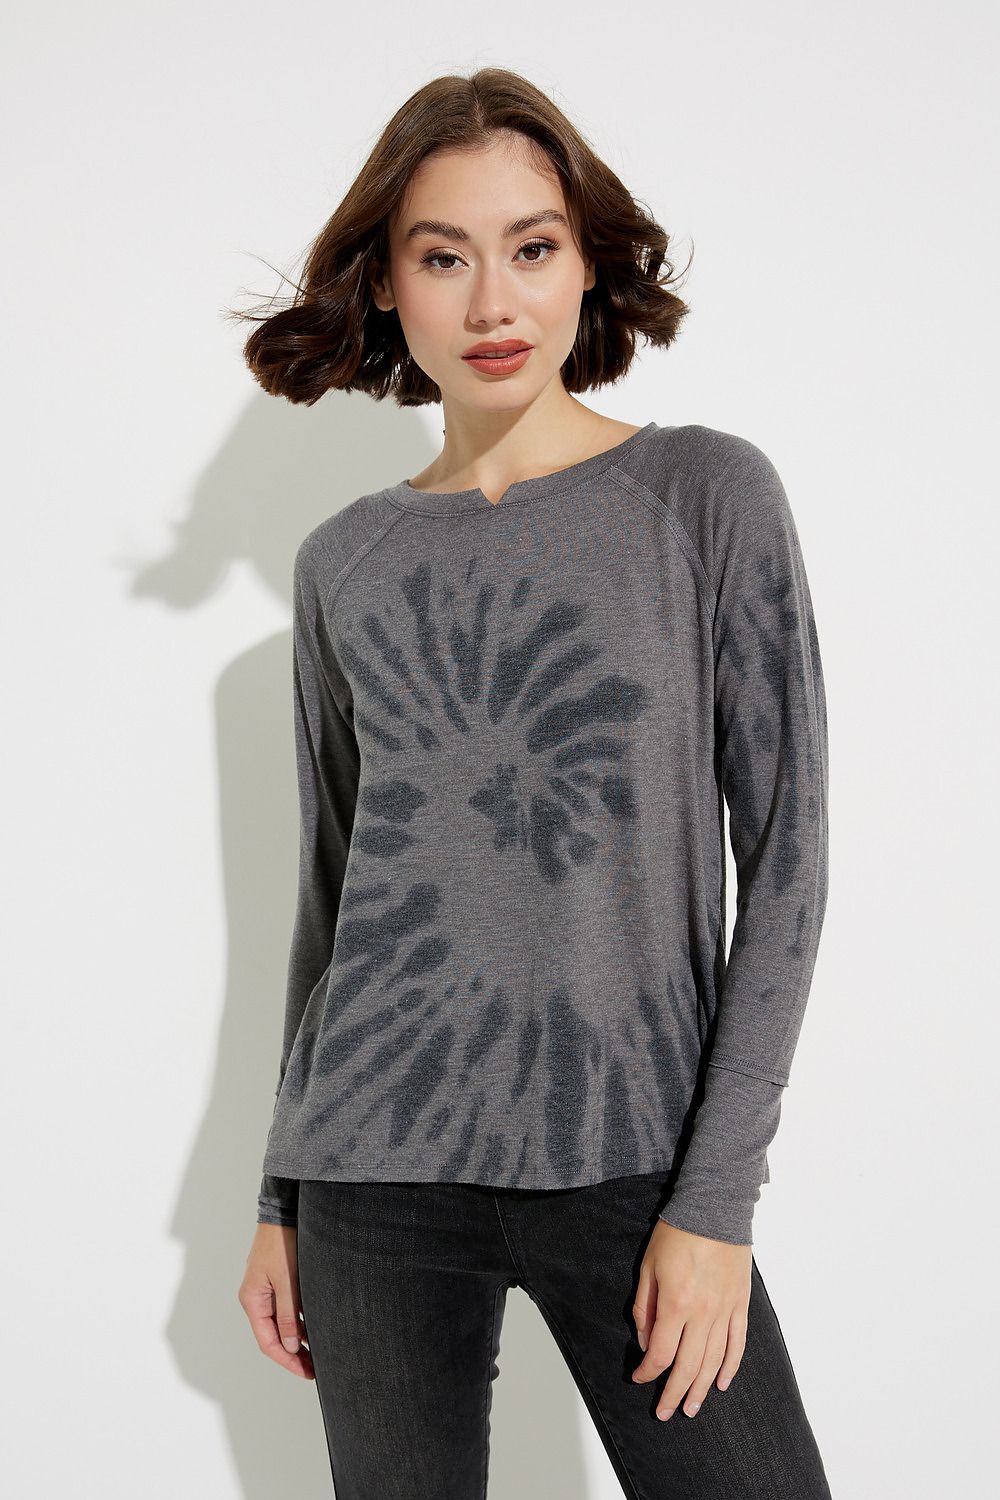 Tie-Dye Soft Jersey Top Style C1287T. Charcoal